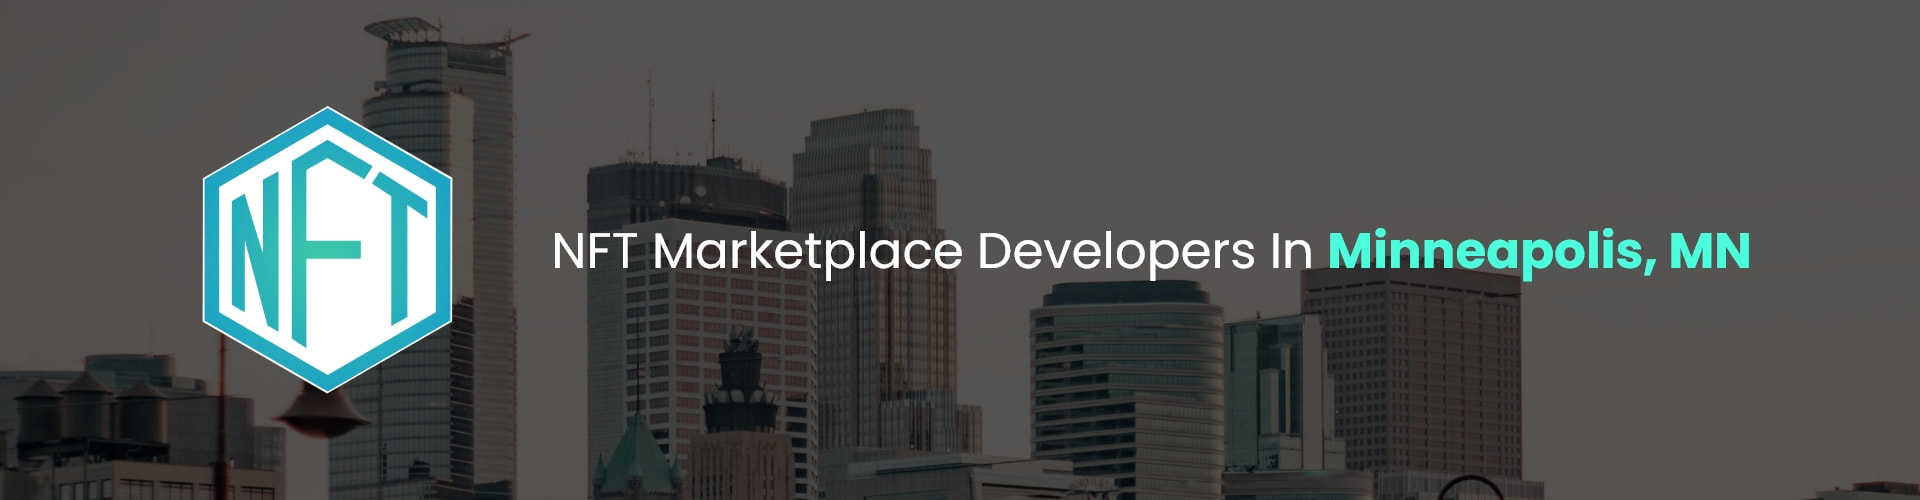 hire nft marketplace developers in minneapolis